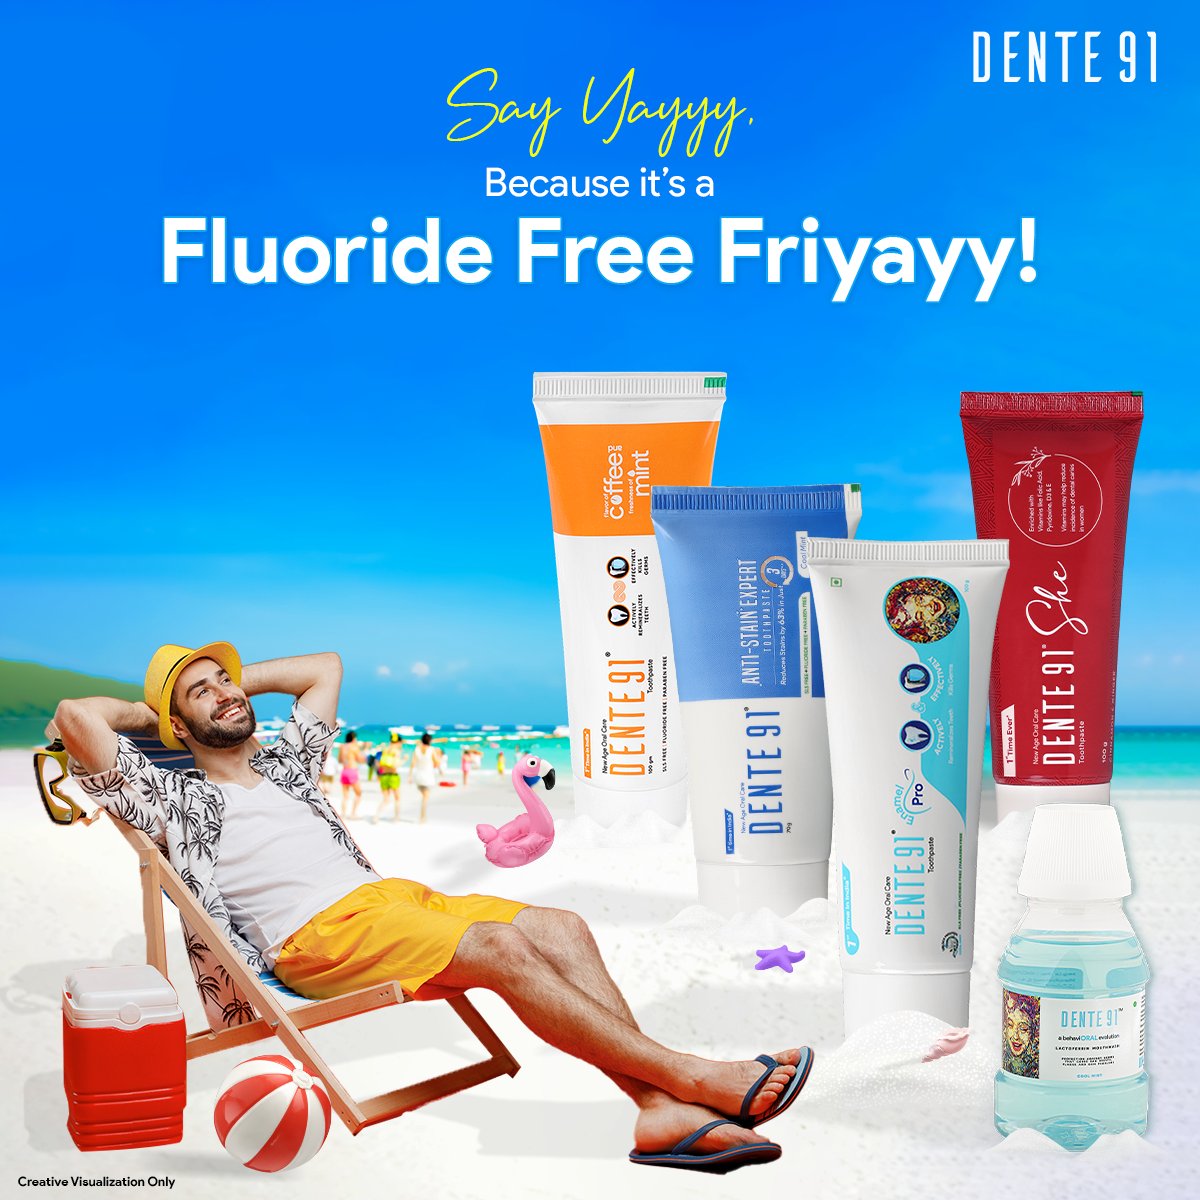 It's not just a Friday, It's a Fluoride Free Friday!

#HealthyLiving #HealthyLife #HealthyChoices #HealthyHabits #Health #Dente91 #FluorideFreeFriday #FluorideFree #SLSFree #ParabenFree